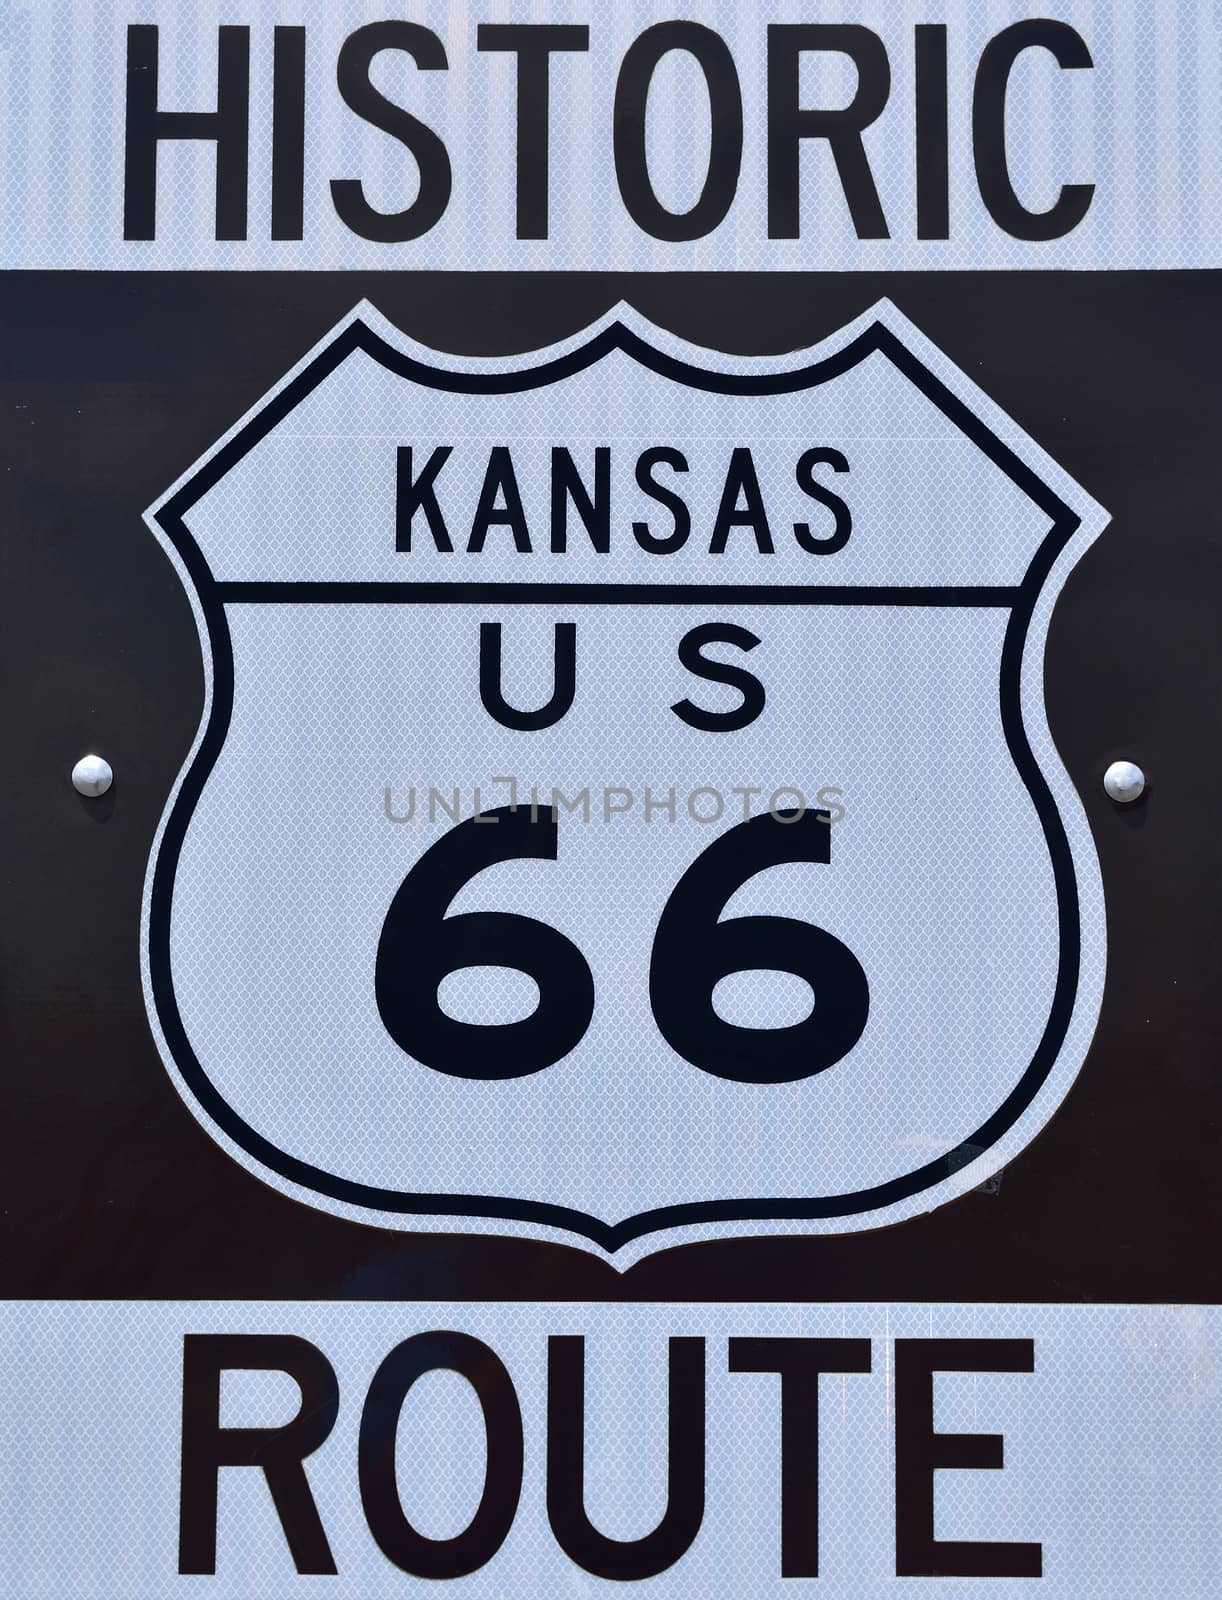 Old historic Route 66 sign. by CreativePhotoSpain